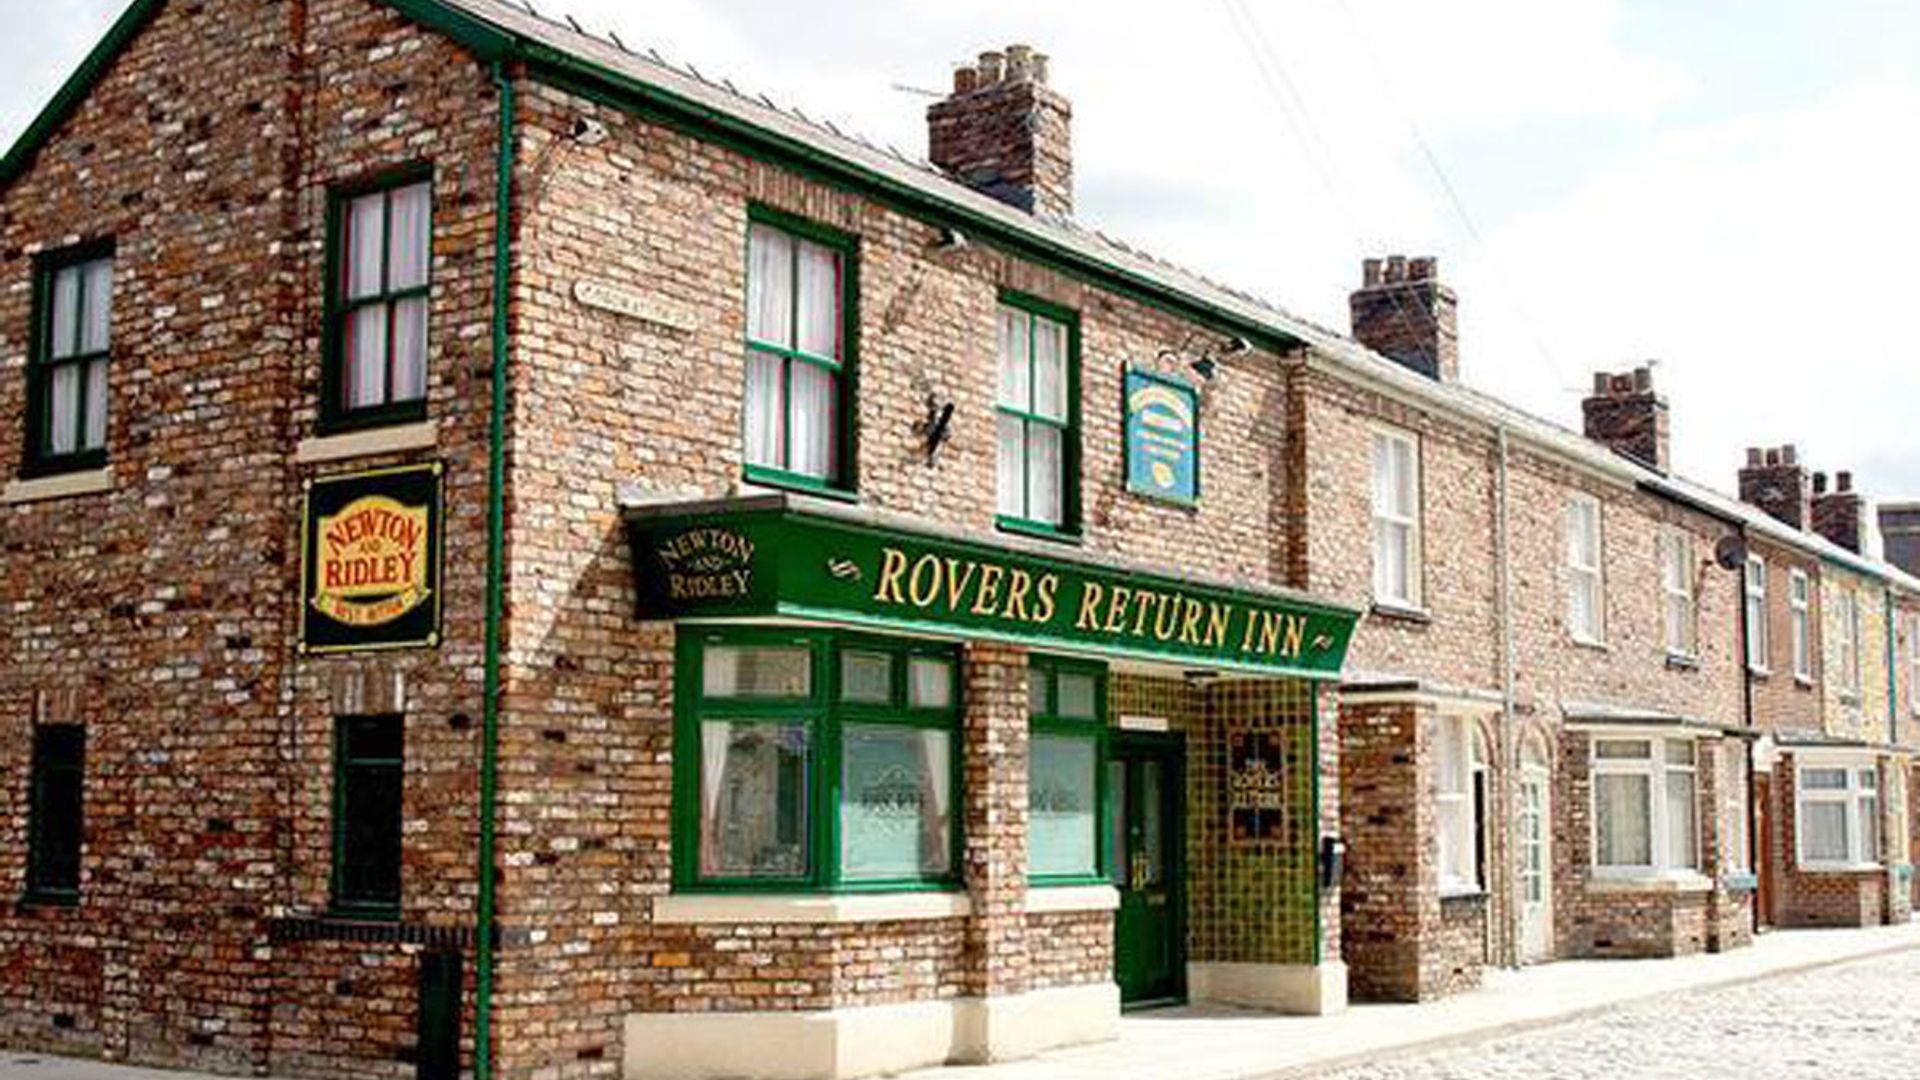 Obsessed with Corrie? Here's how you can visit the set of Coronation Street